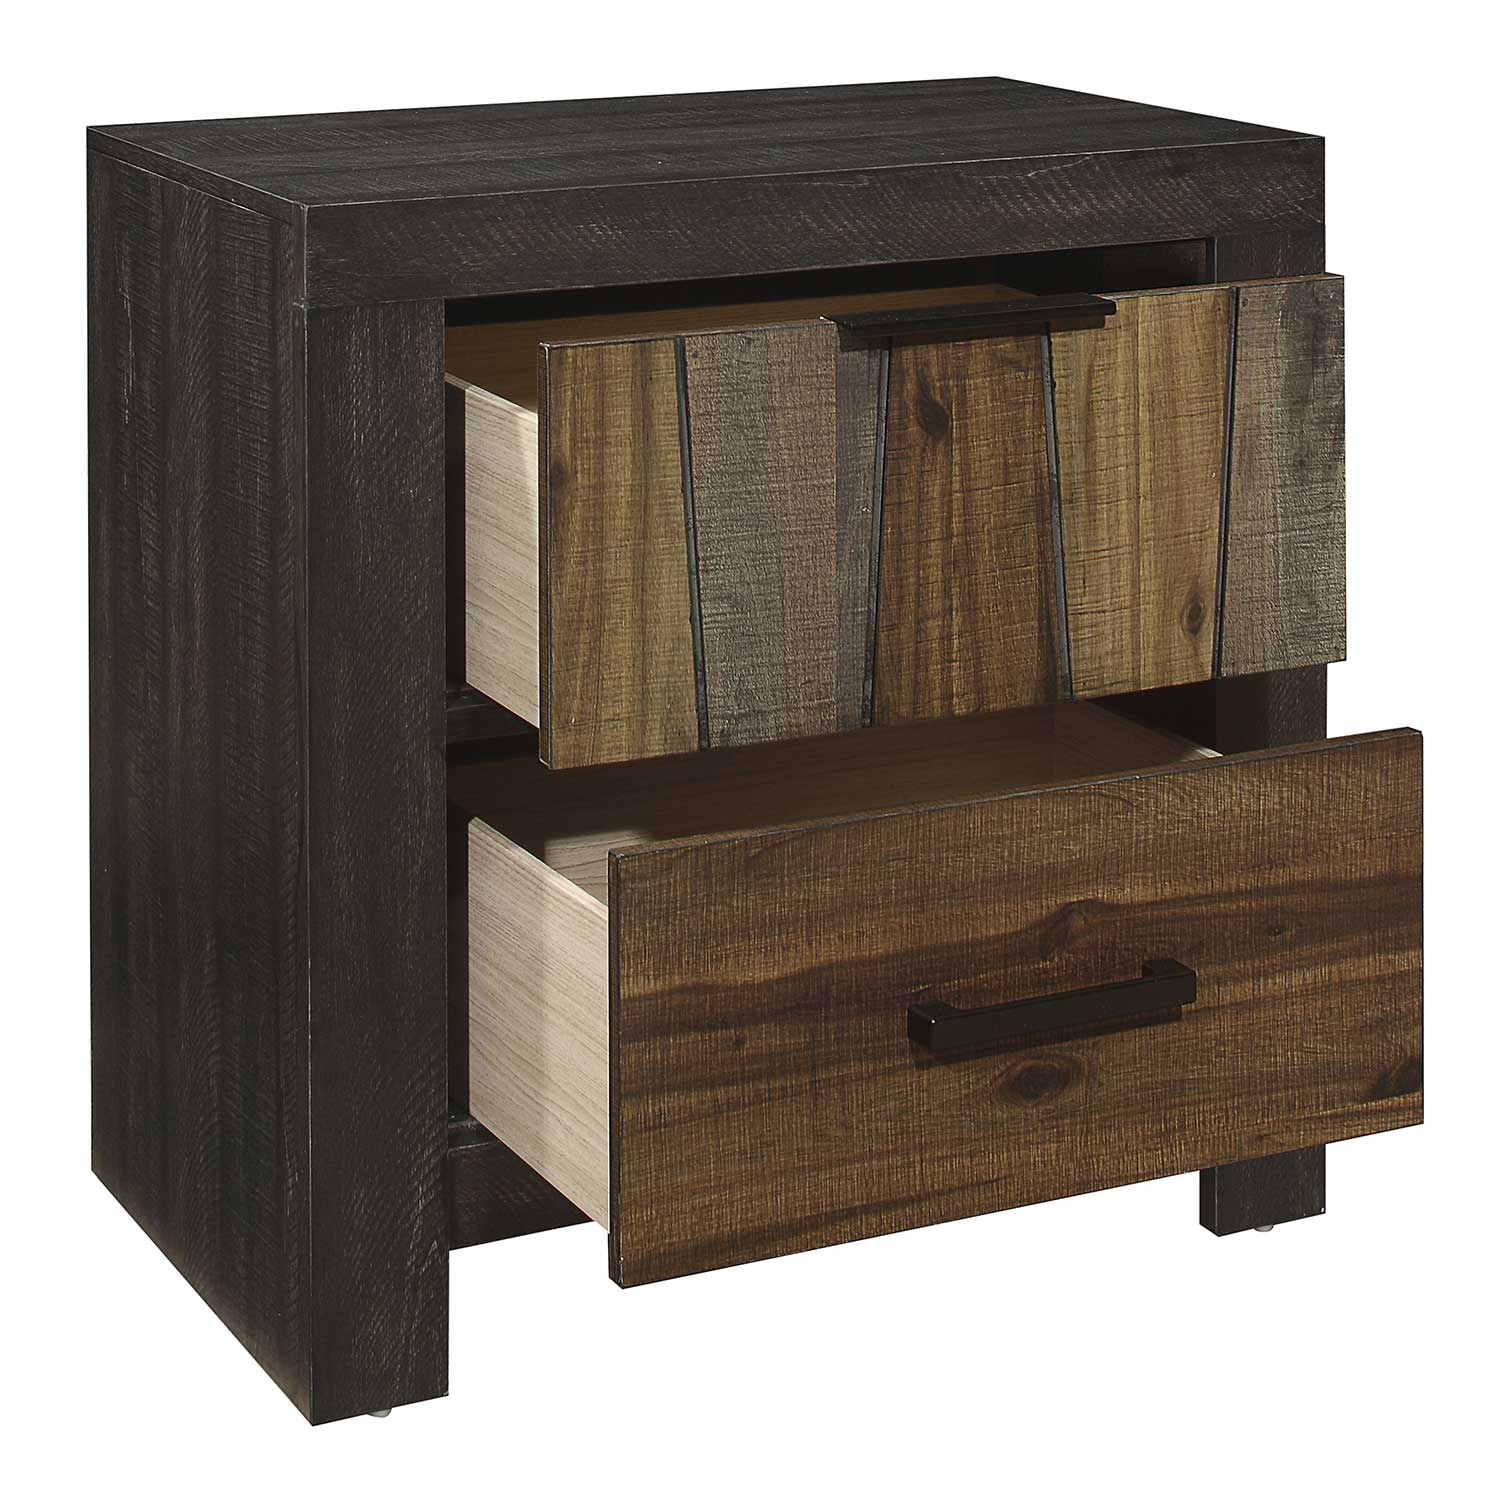 Homelegance Cooper Night Stand - Wire-brushed multi-tone